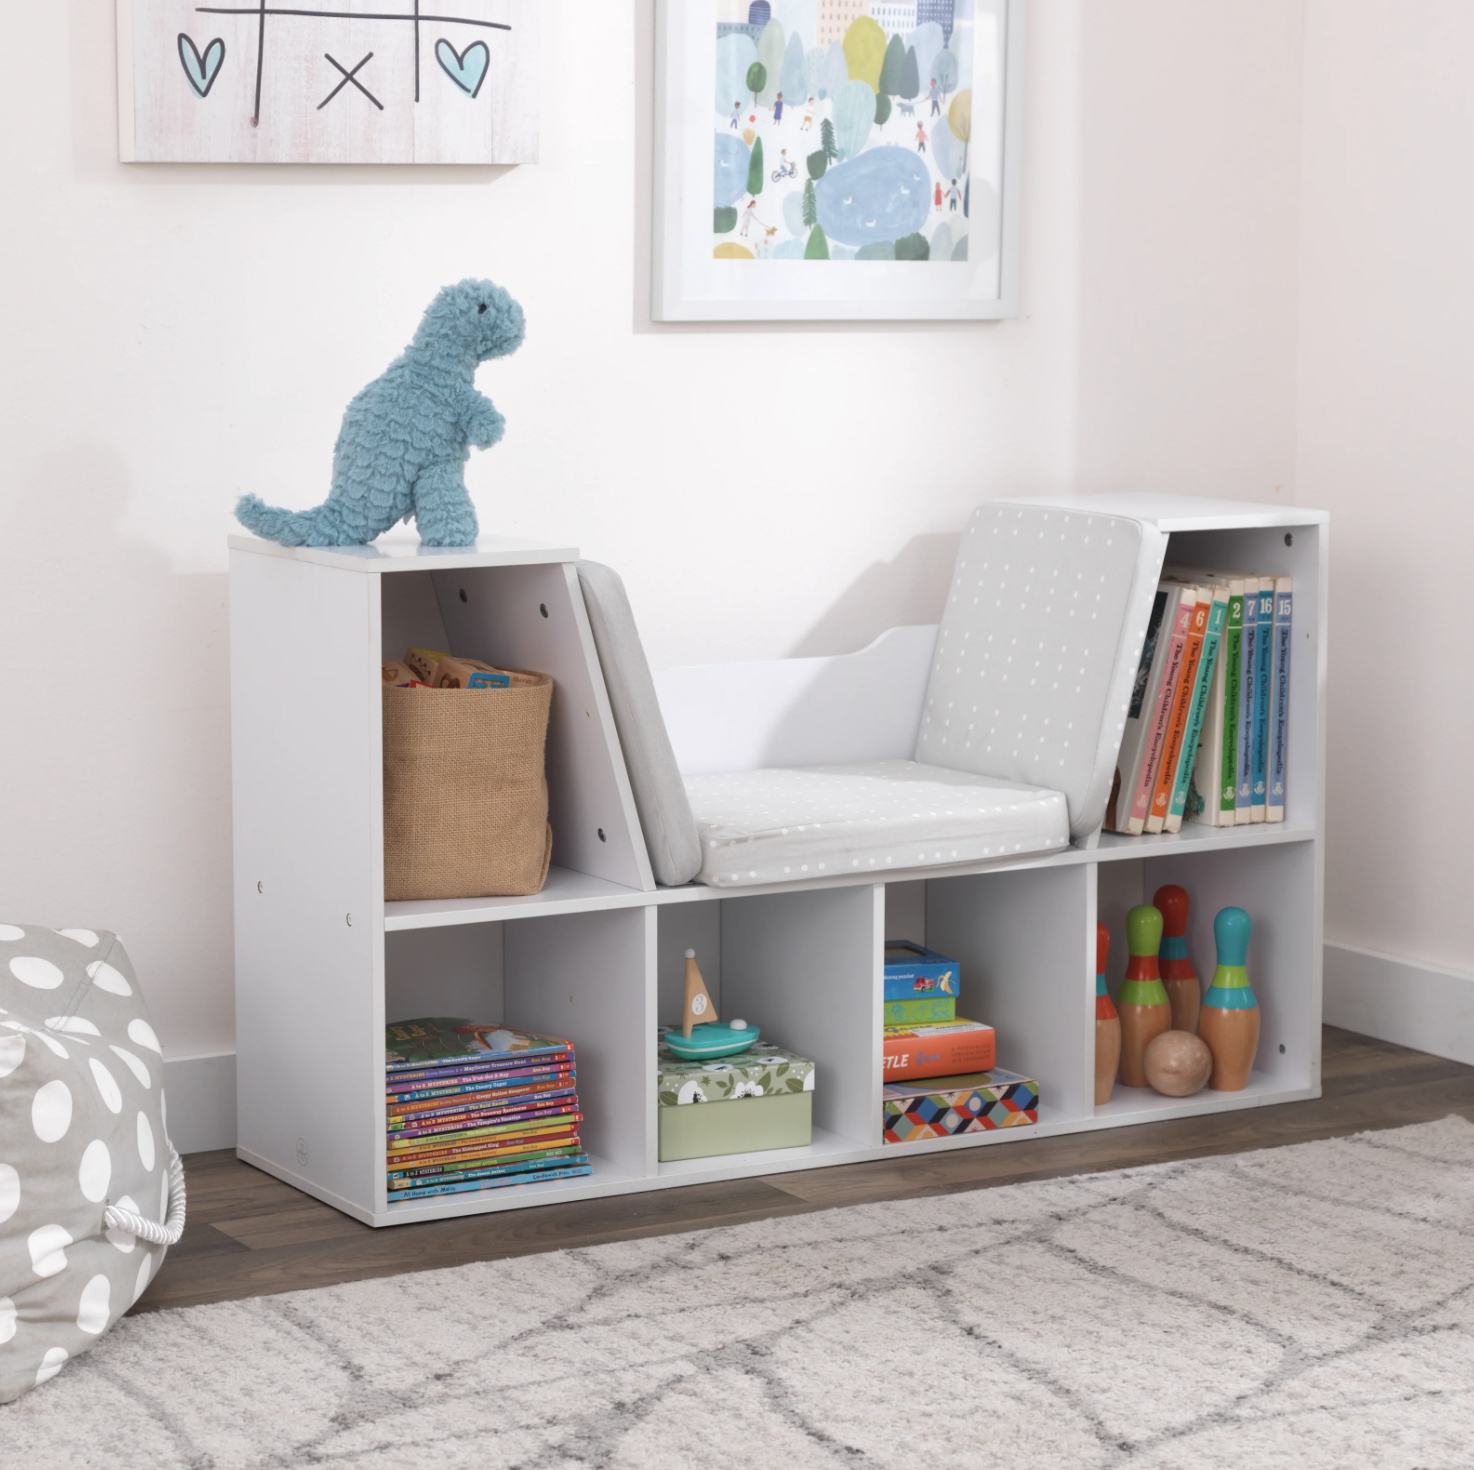 Child&#x27;s room with a white storage bench holding books and toys, with a dinosaur plush on top